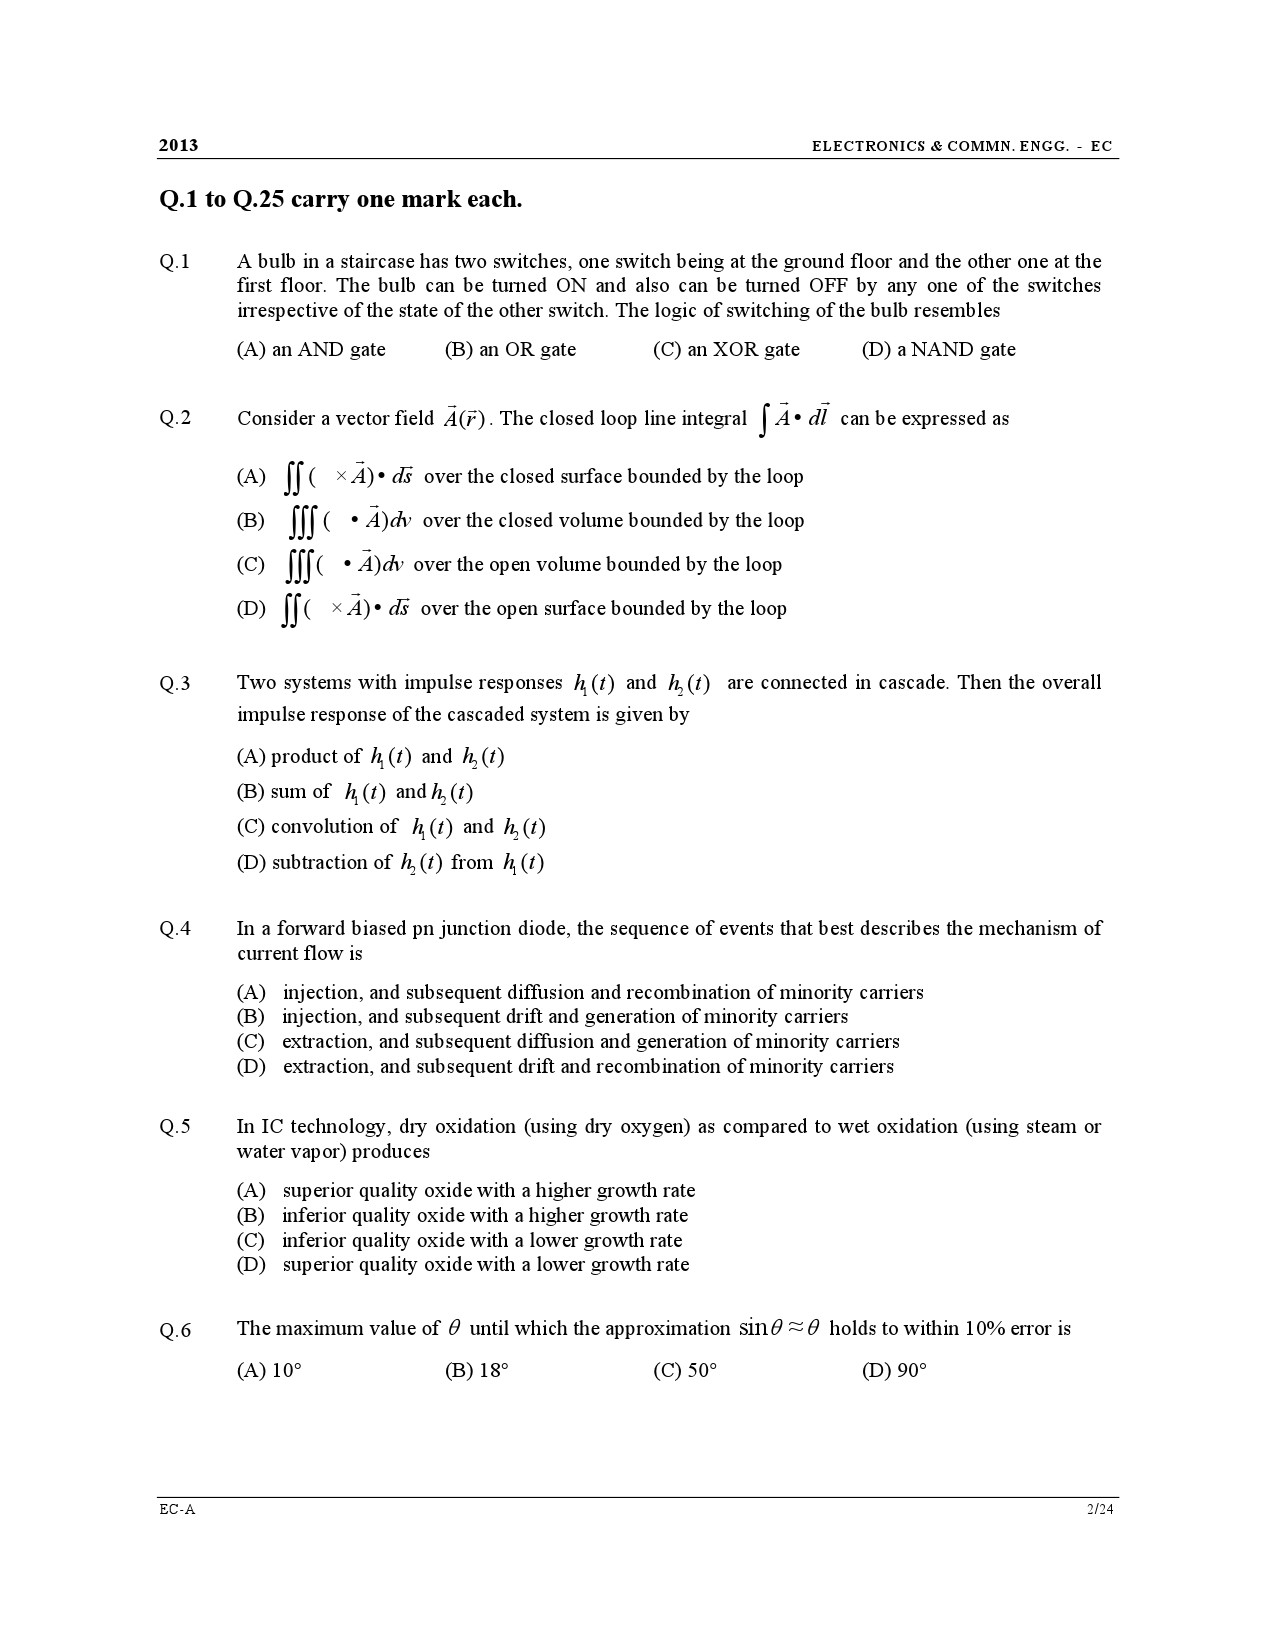 GATE Exam Question Paper 2013 Electronics and Communication Engineering 2